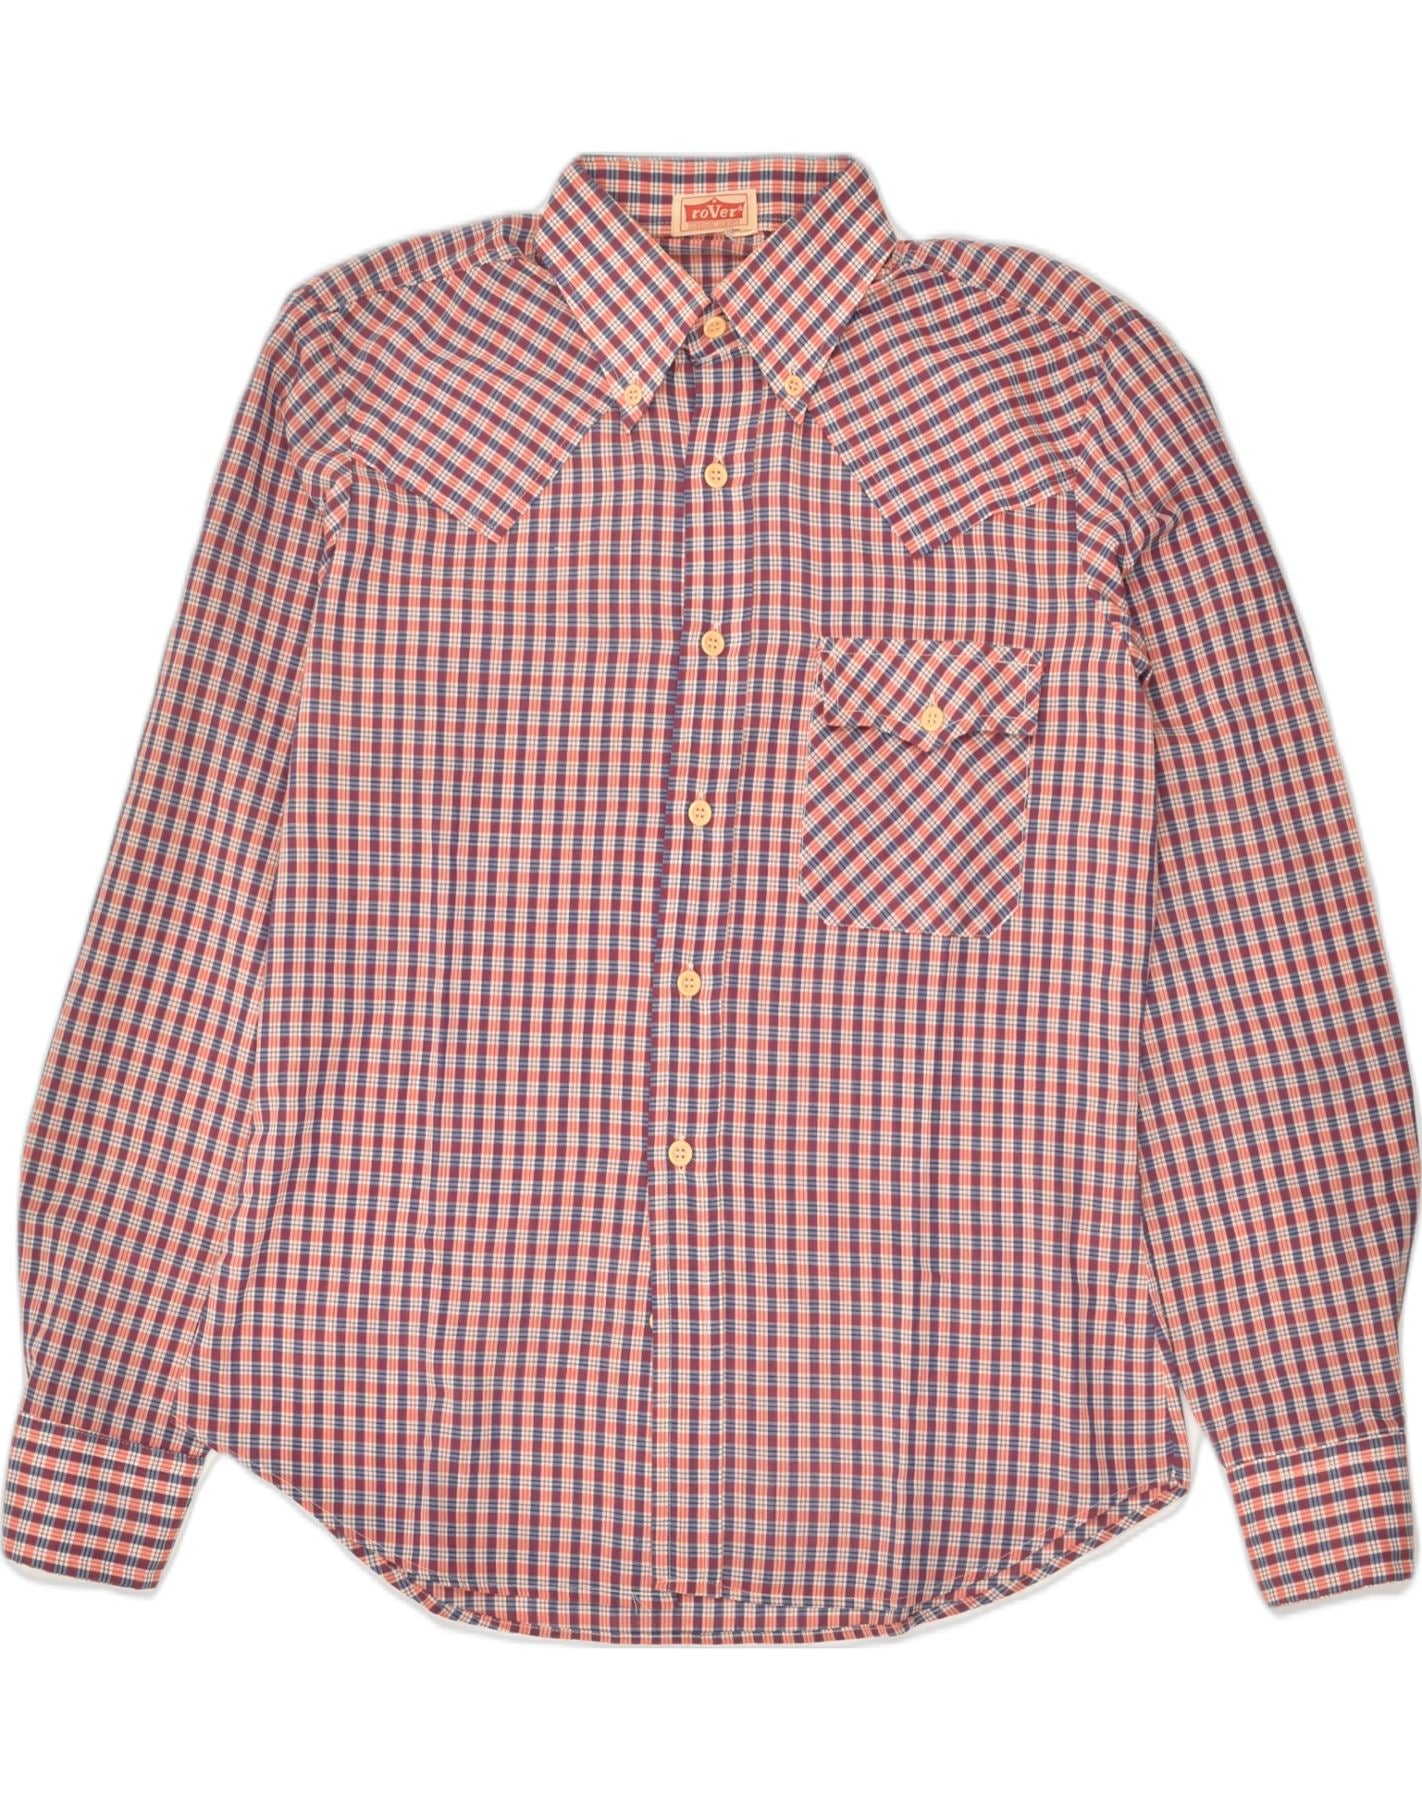 VINTAGE Mens Shirt Size 38/39 Medium Red Check Cotton, Vintage &  Second-Hand Clothing Online